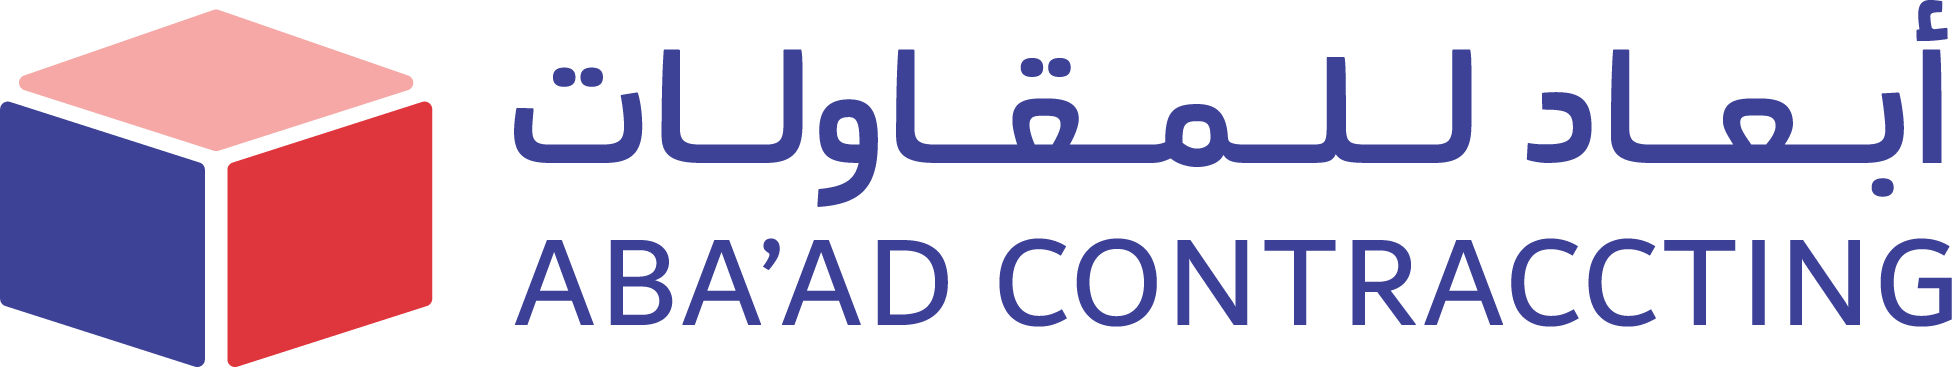 Abaad Contracting